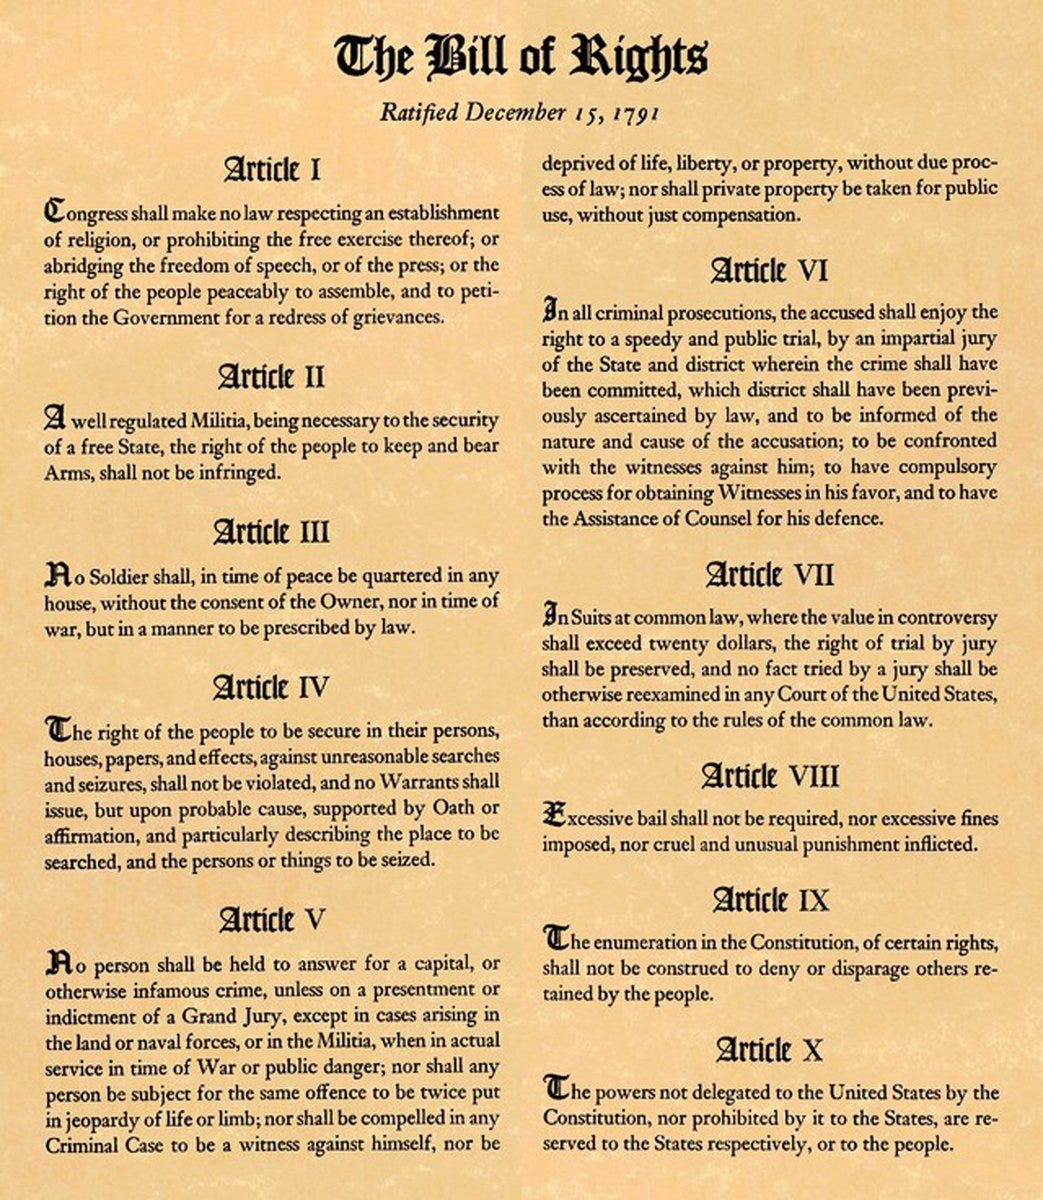 John Kasich on Twitter: "The rights defined in the first ten amendments to  our Constitution have protected some of our most fundamental freedoms, and  on this day in 1791 those freedoms were